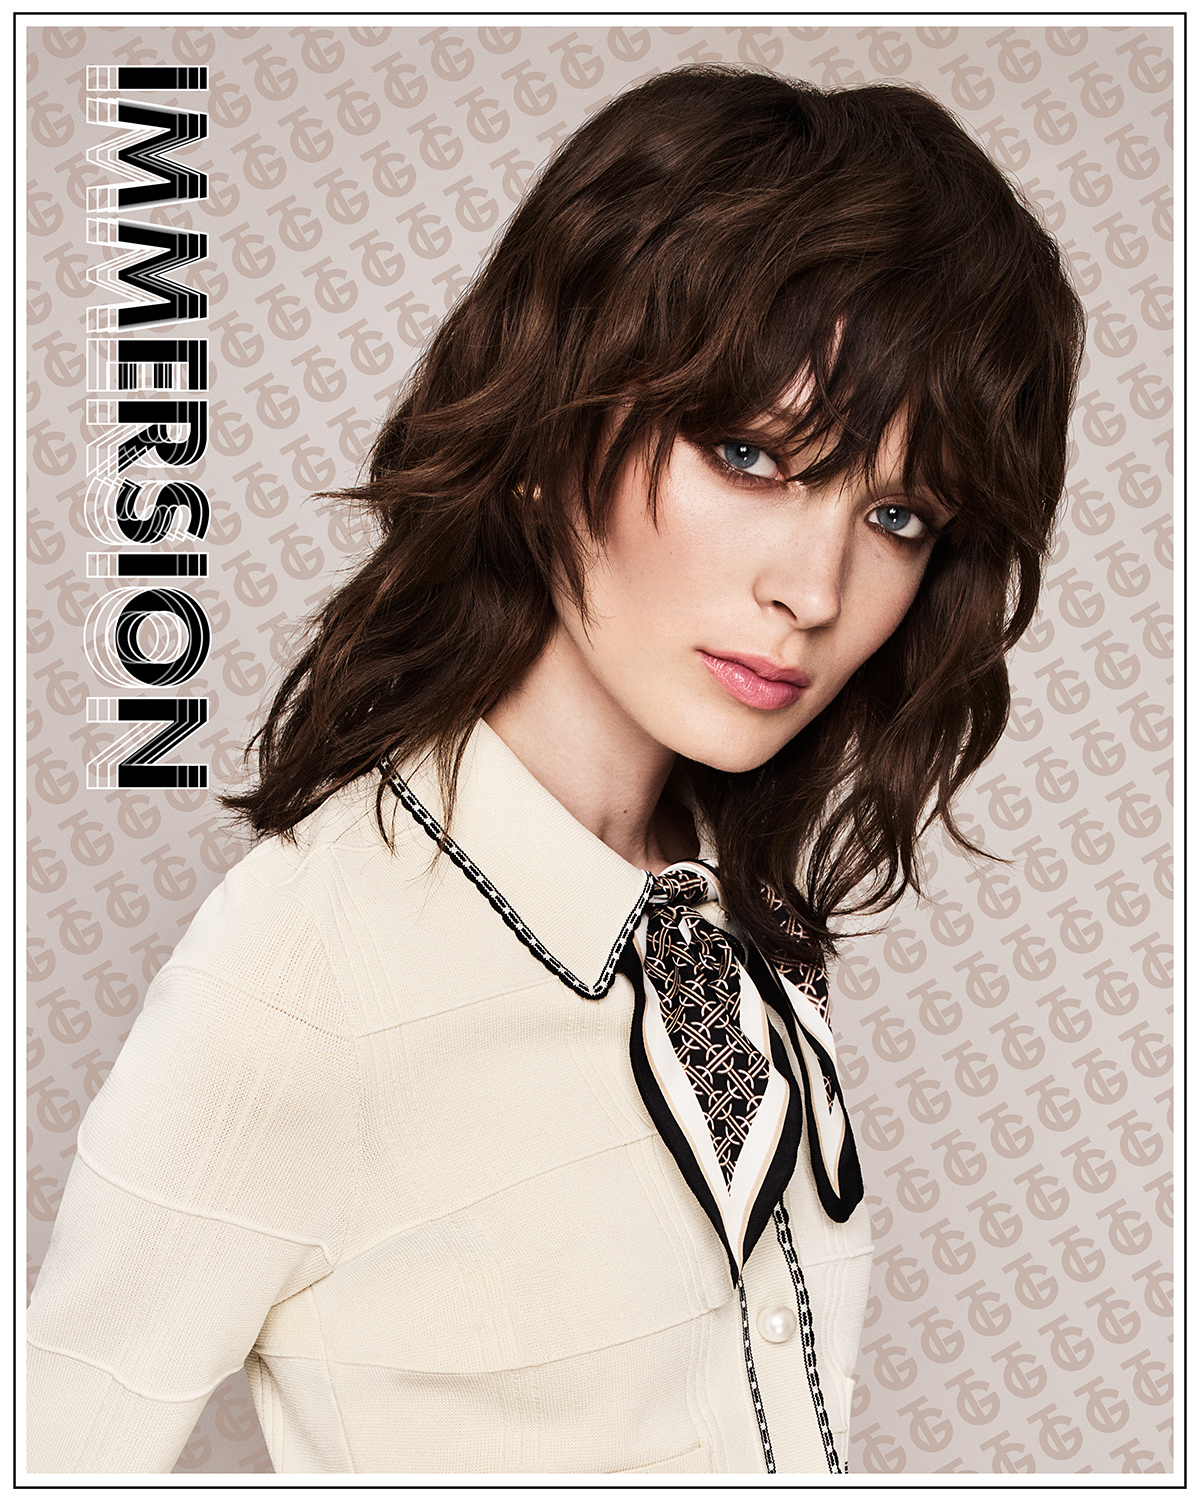 TONI&GUY-IMMERSION-CAMPAIGN-2022-LILY-CUT-SOCIAL-GRID-Posts-1080x1350-FIN16